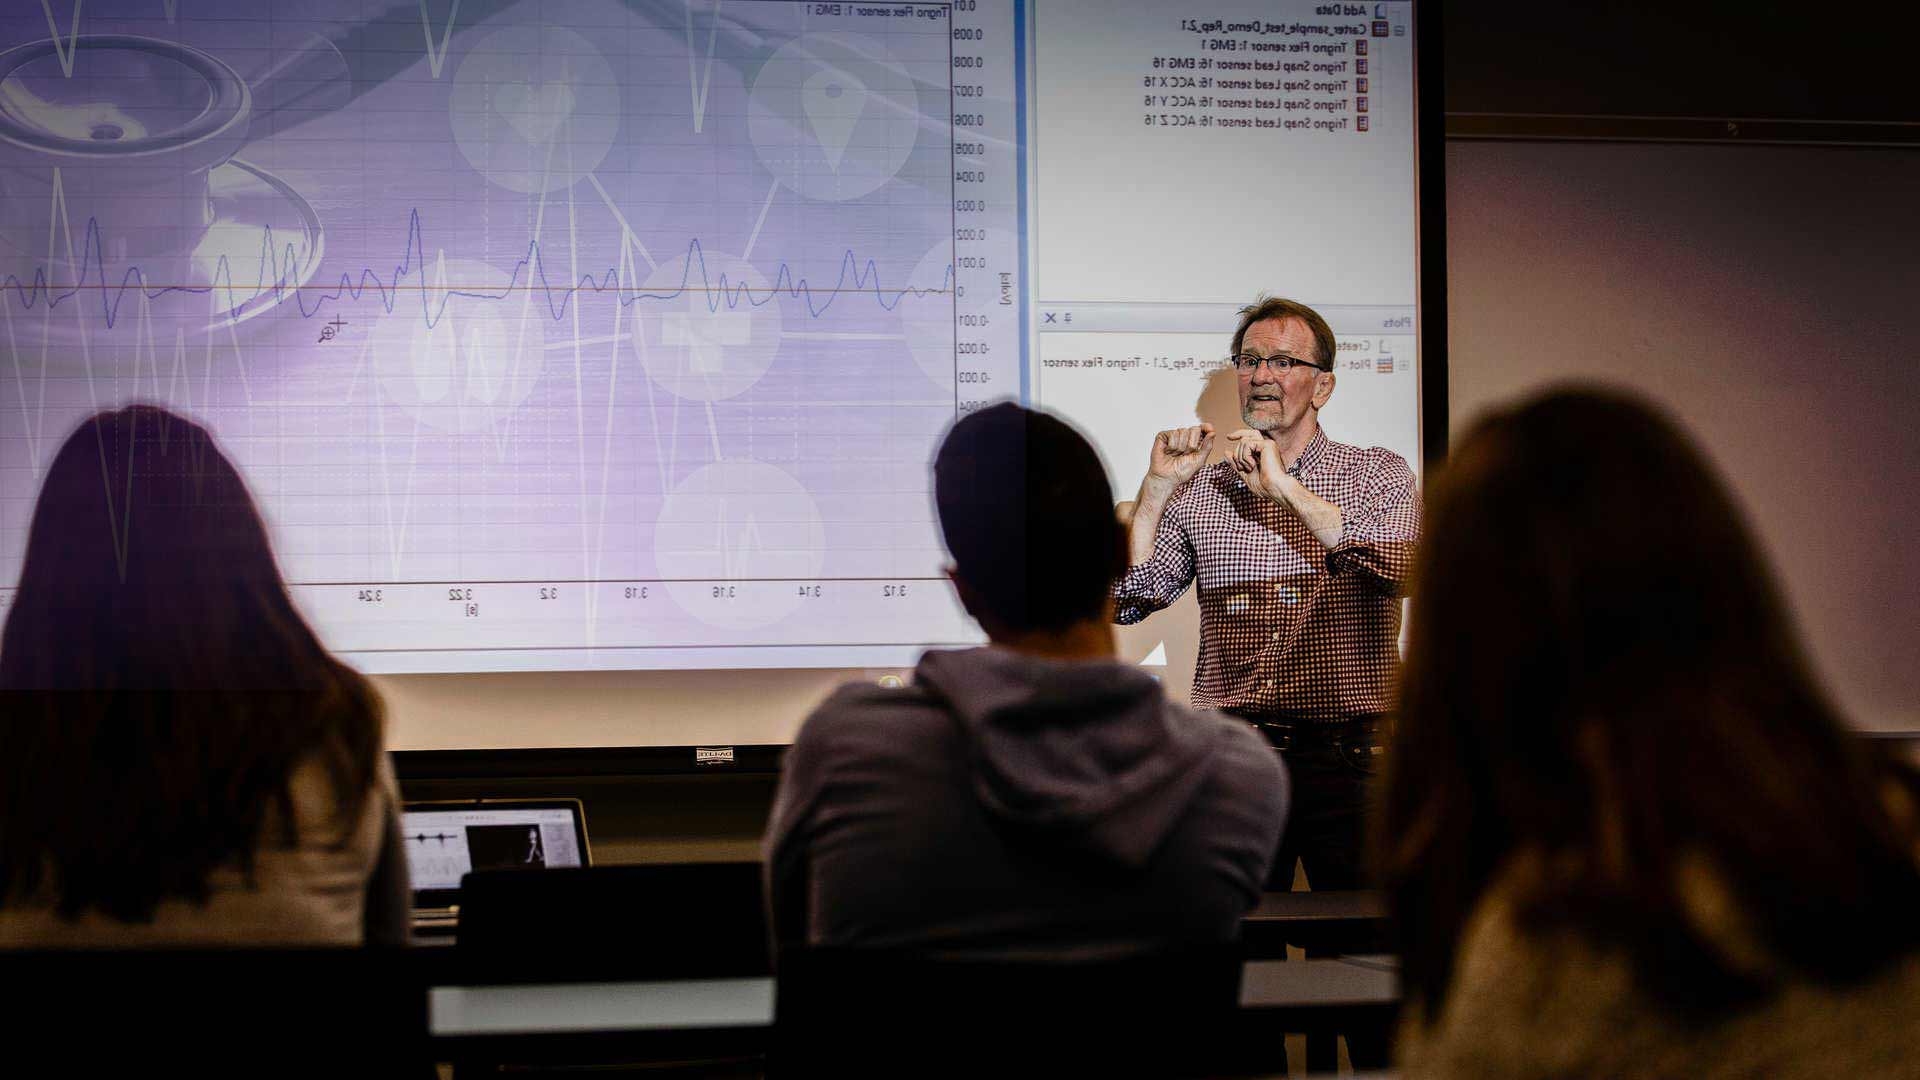 Professor teaching in front of a class